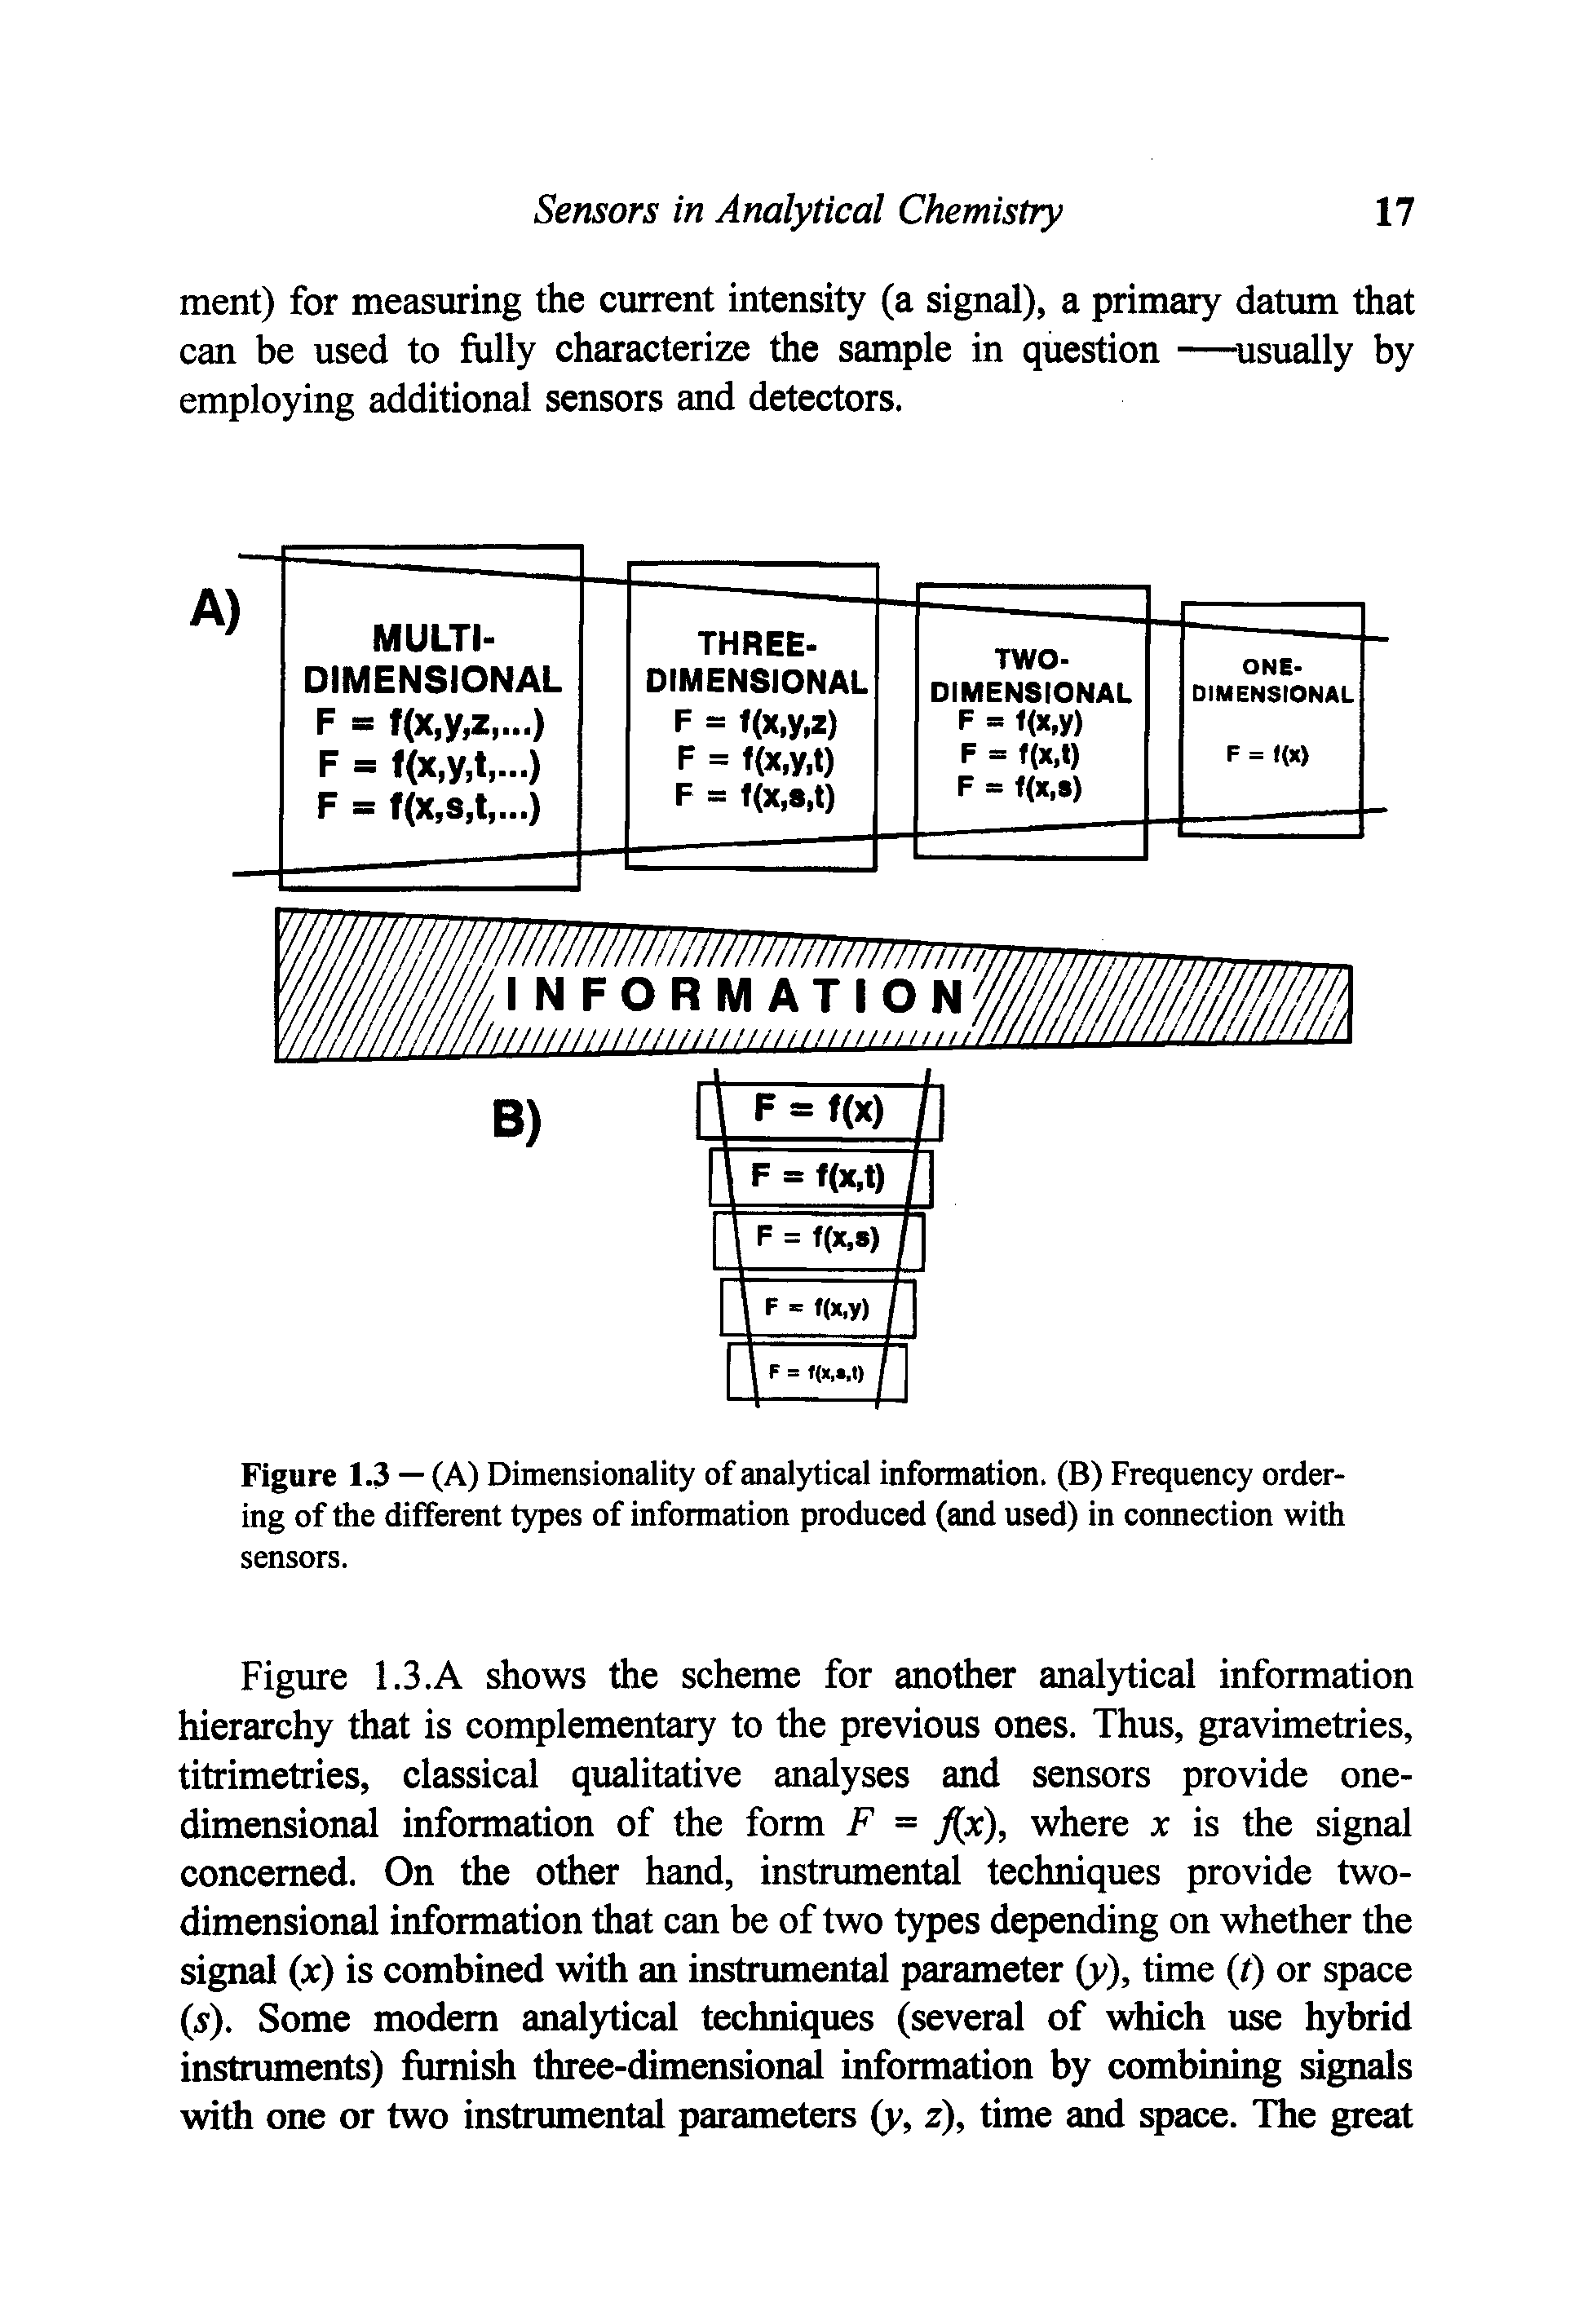 Figure 1.3 — (A) Dimensionality of analytical information. (B) Frequency ordering of the different types of information produced (and used) in connection with sensors.